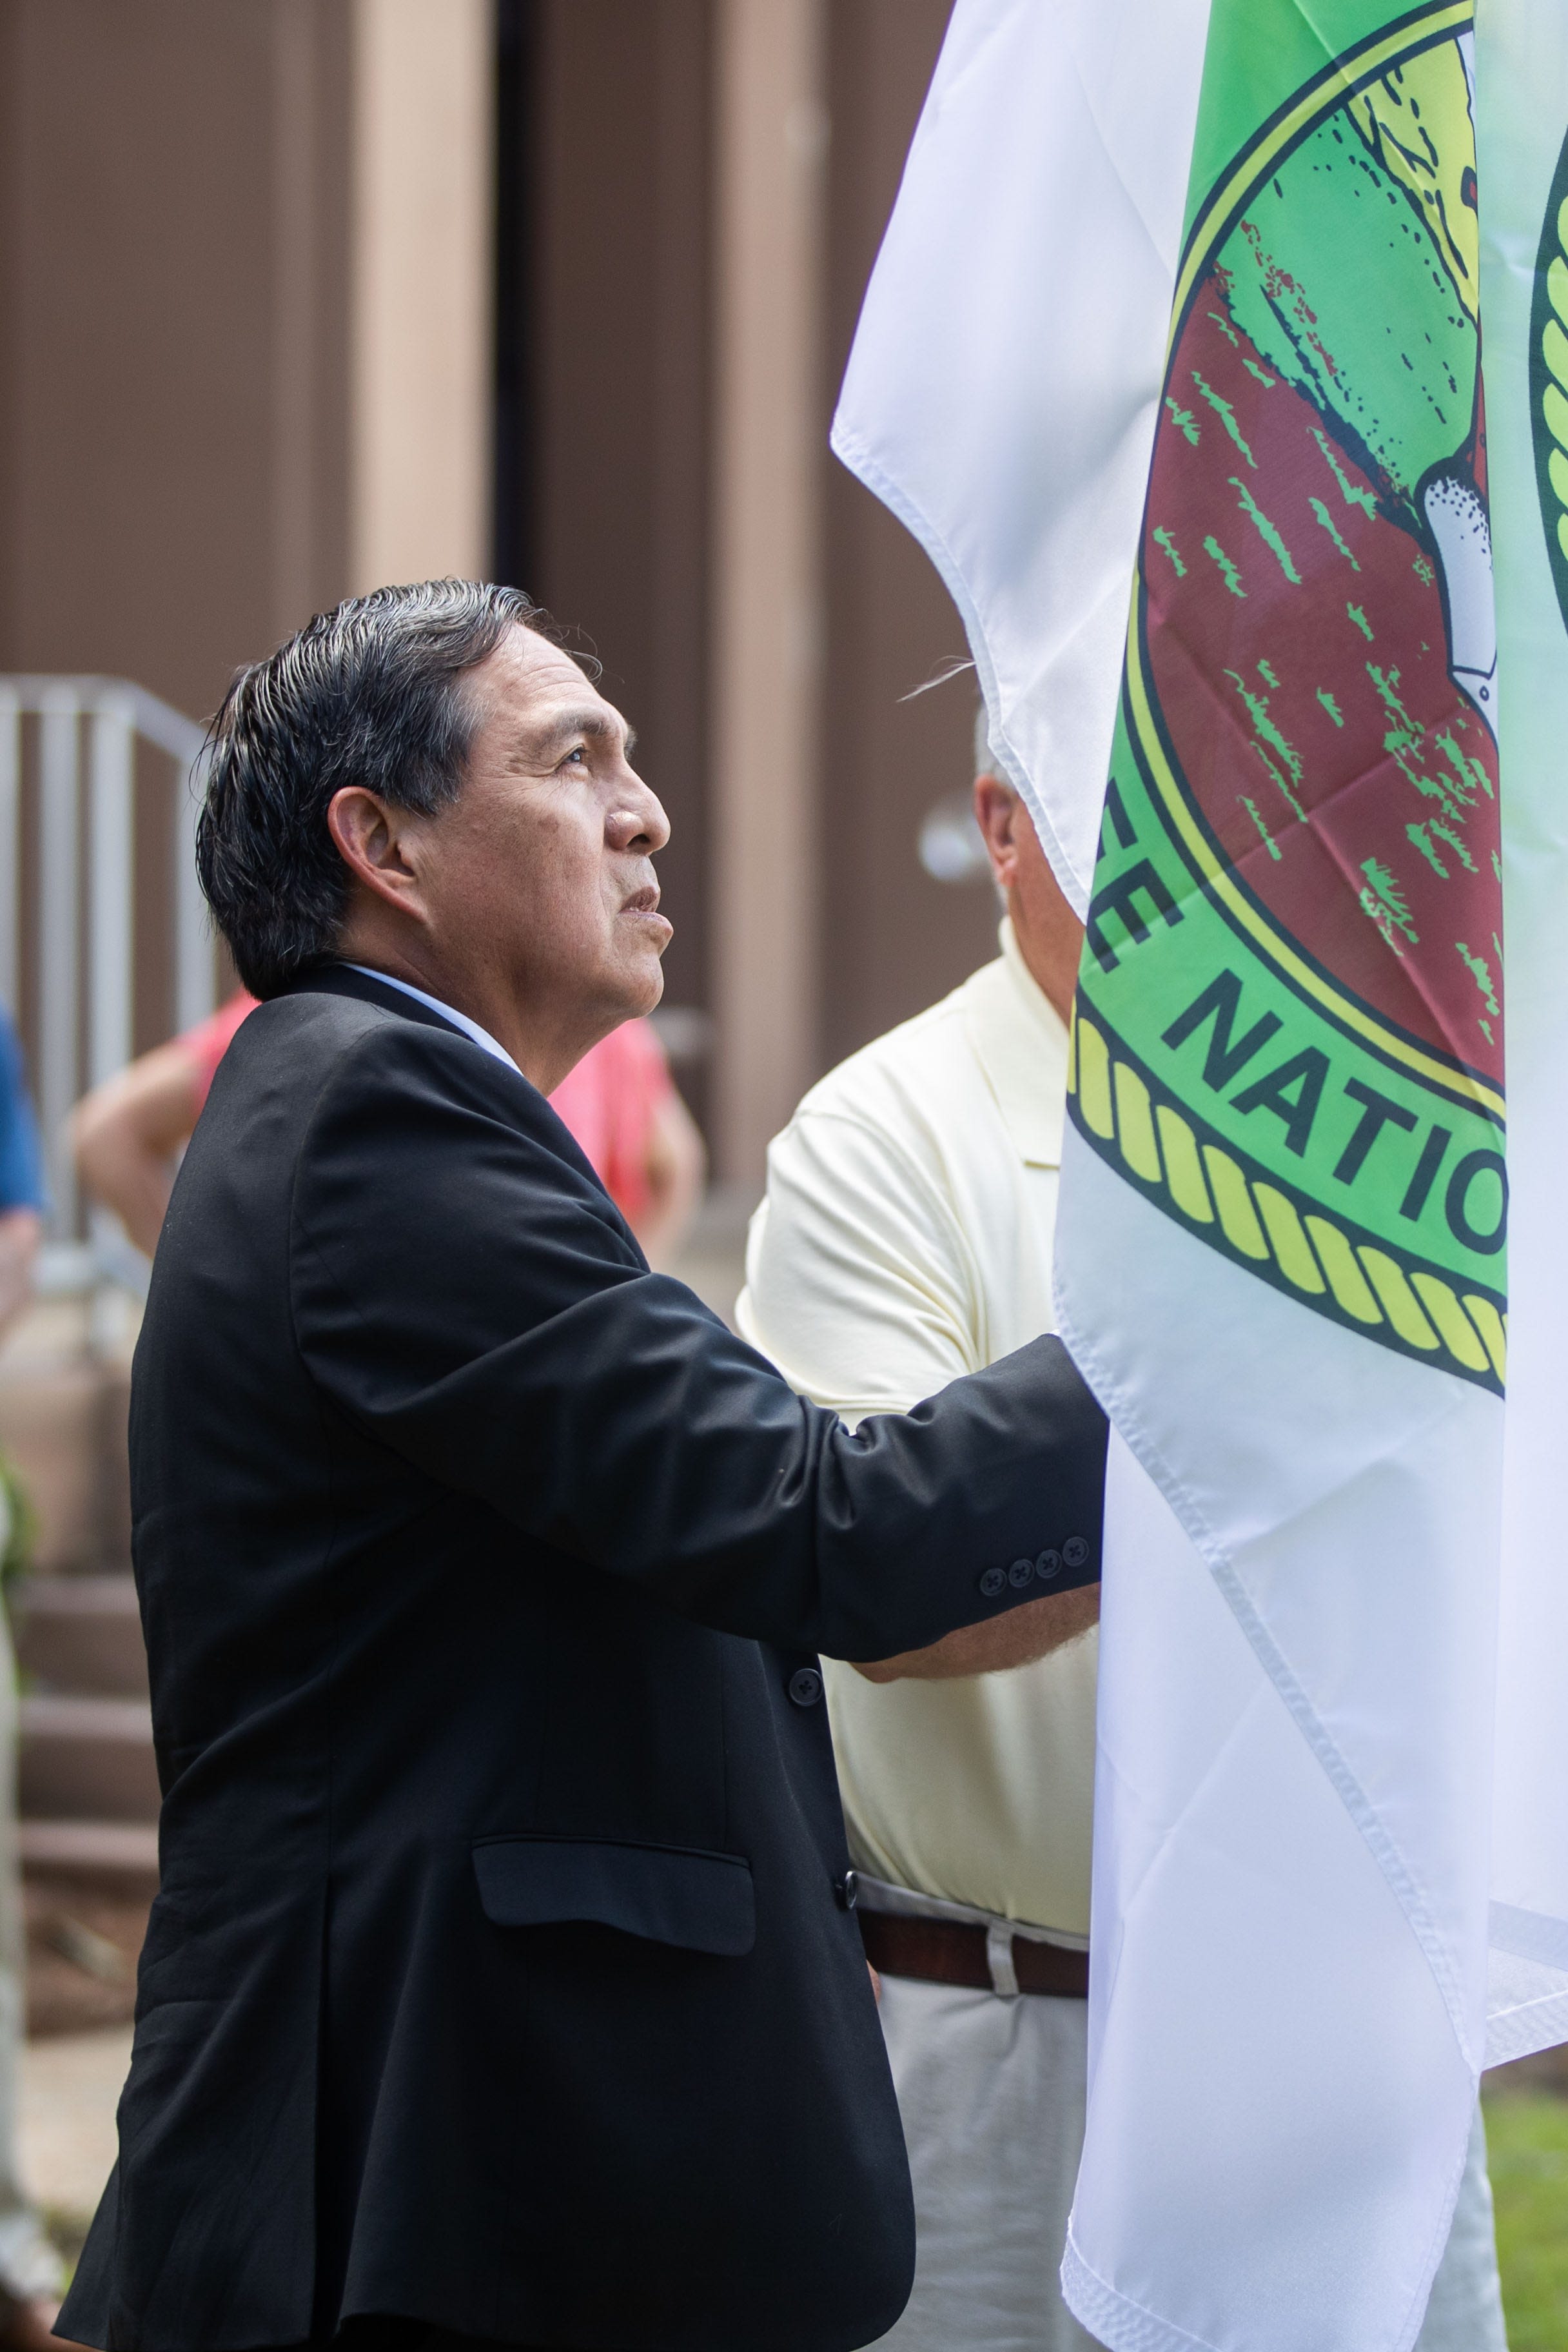 'In the footprints of your ancestors': Muscogee (Creek) Nation returns to Tallahassee area